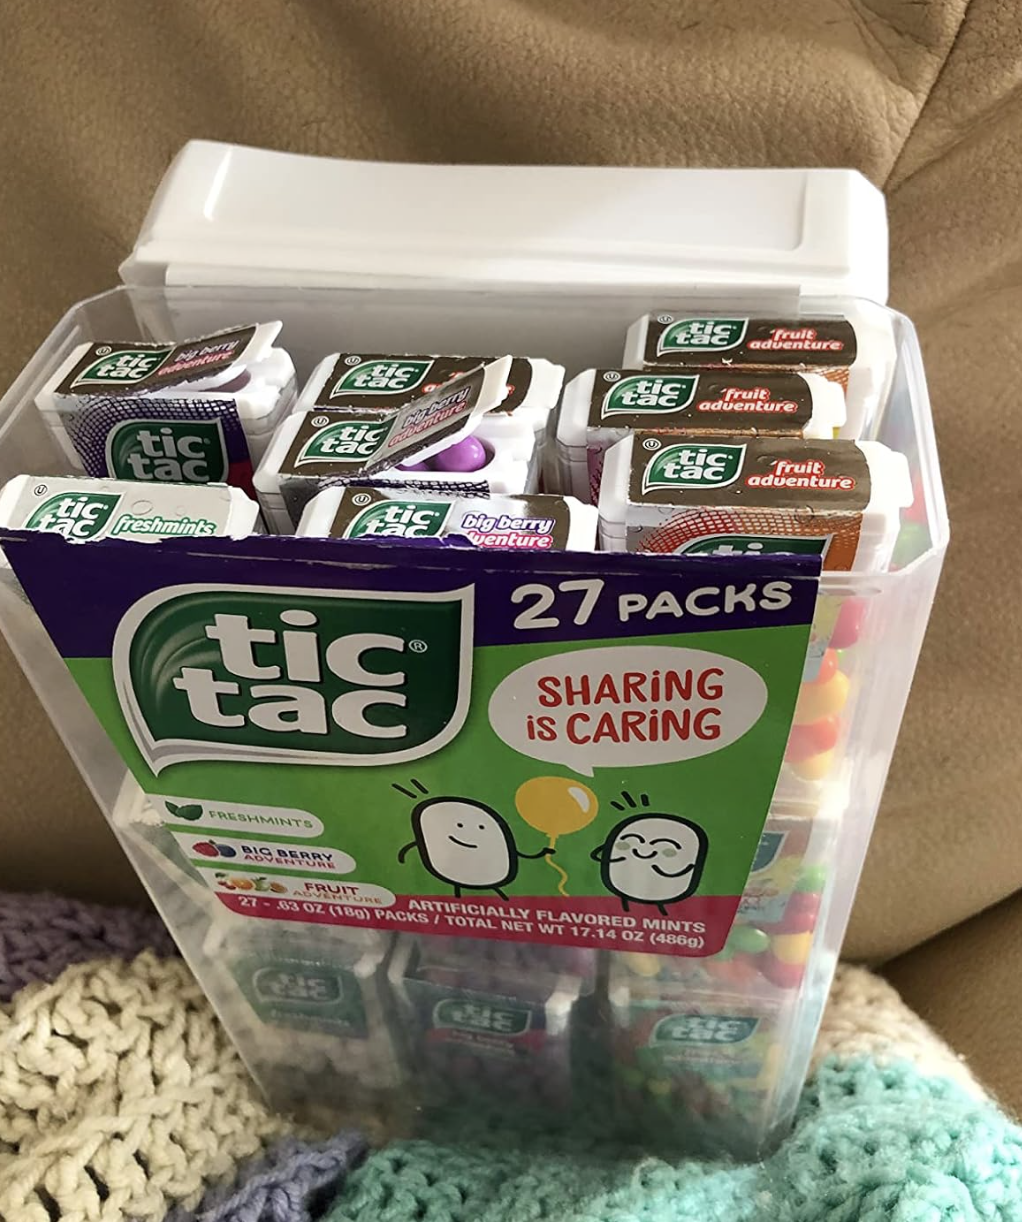 Giant box of tic tacs full of 27 boxes of tic tacs